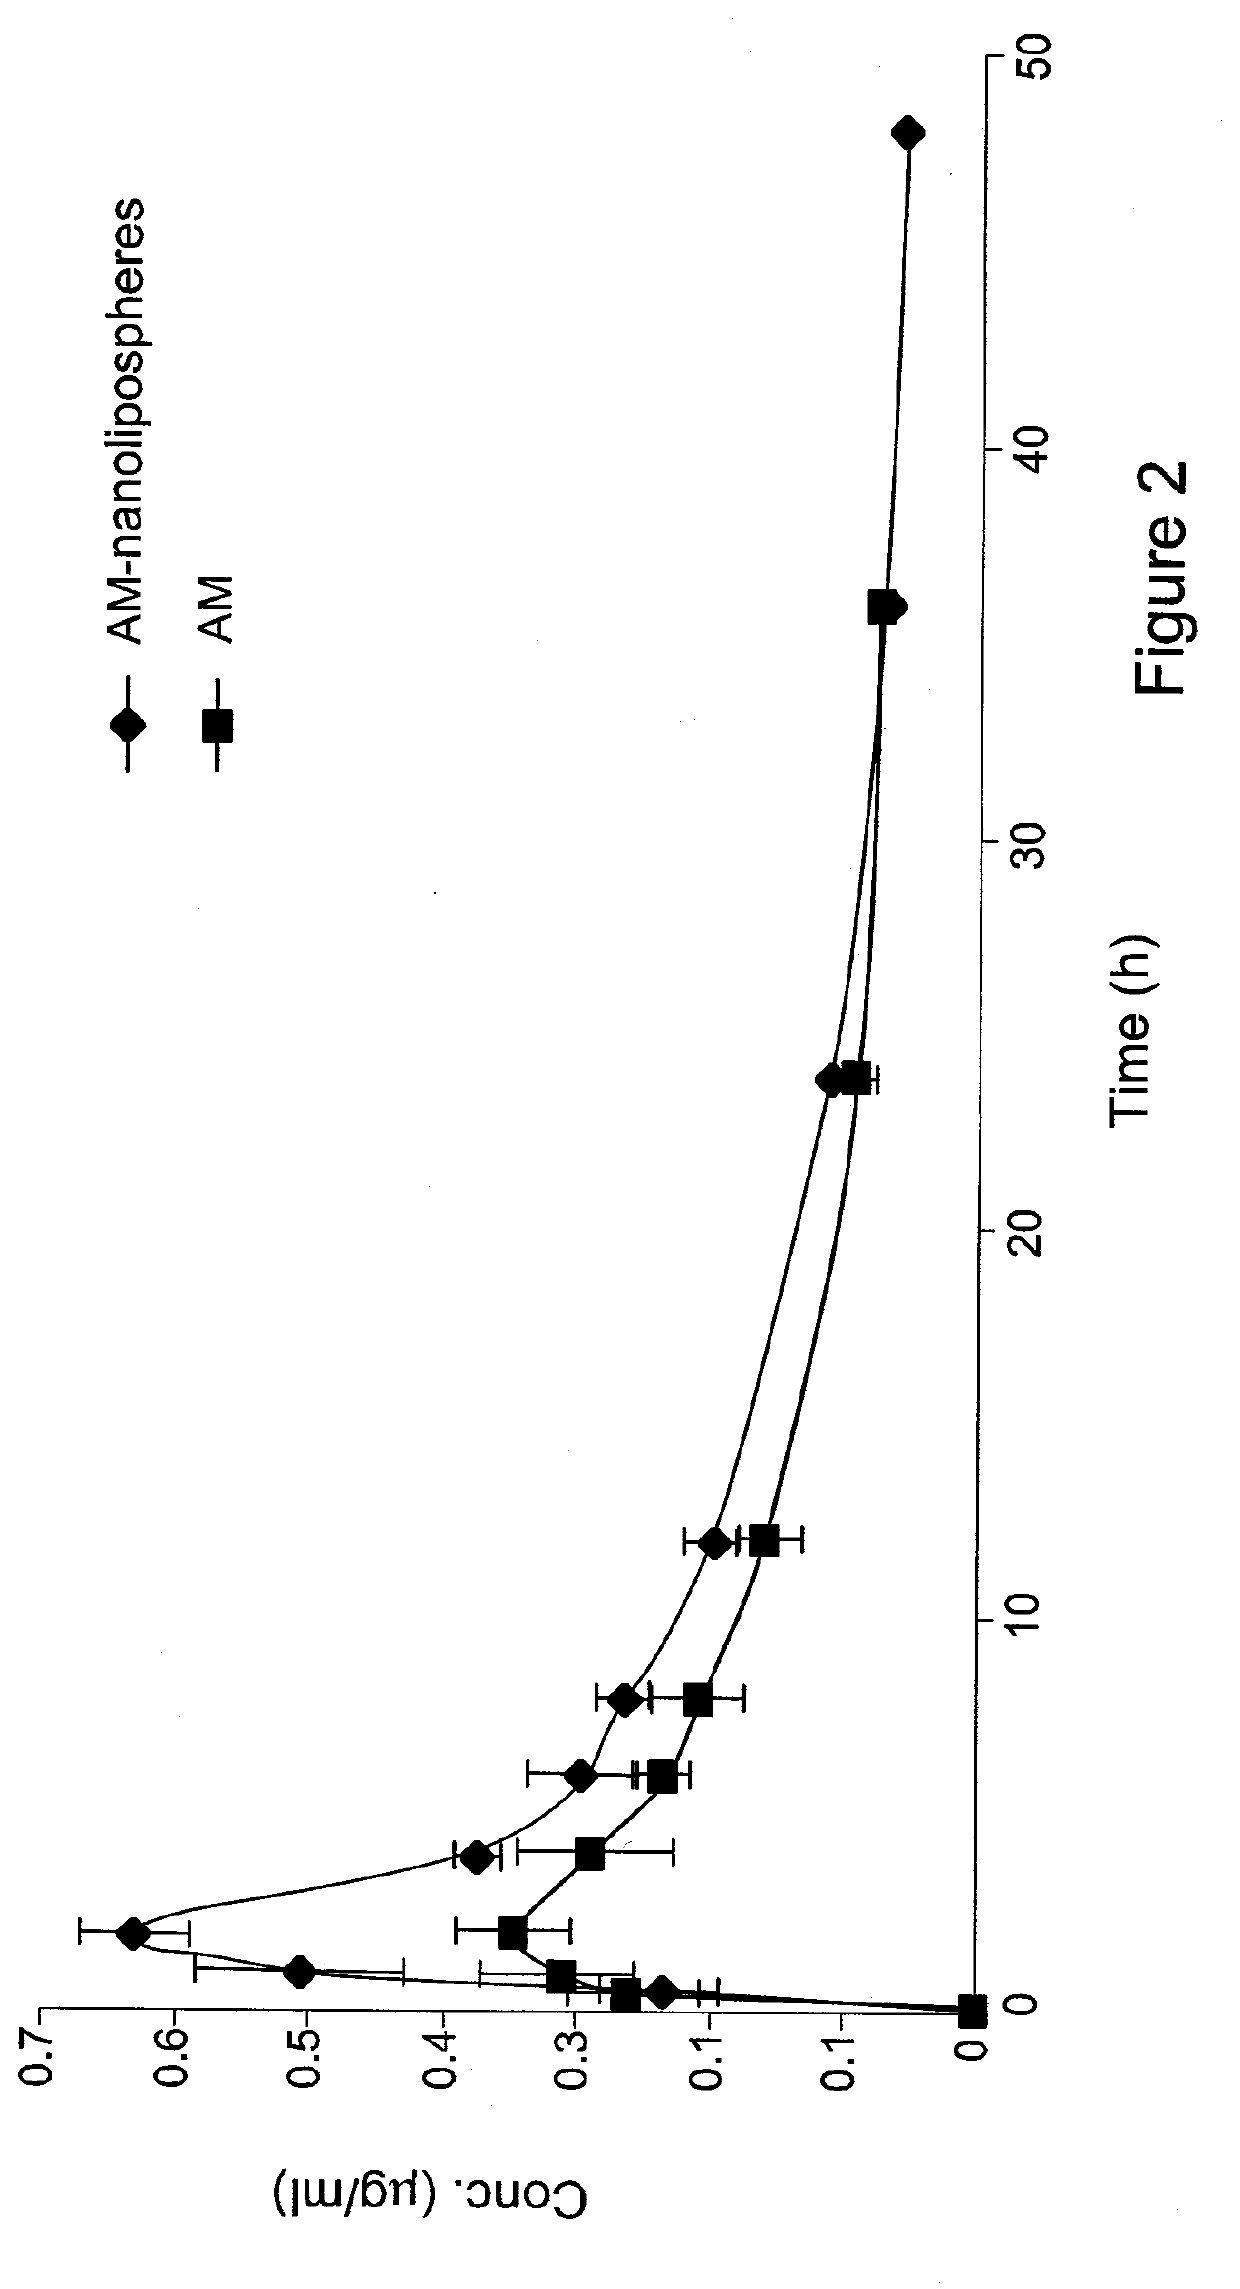 Formulation and method for increasing oral bioavailability of drugs